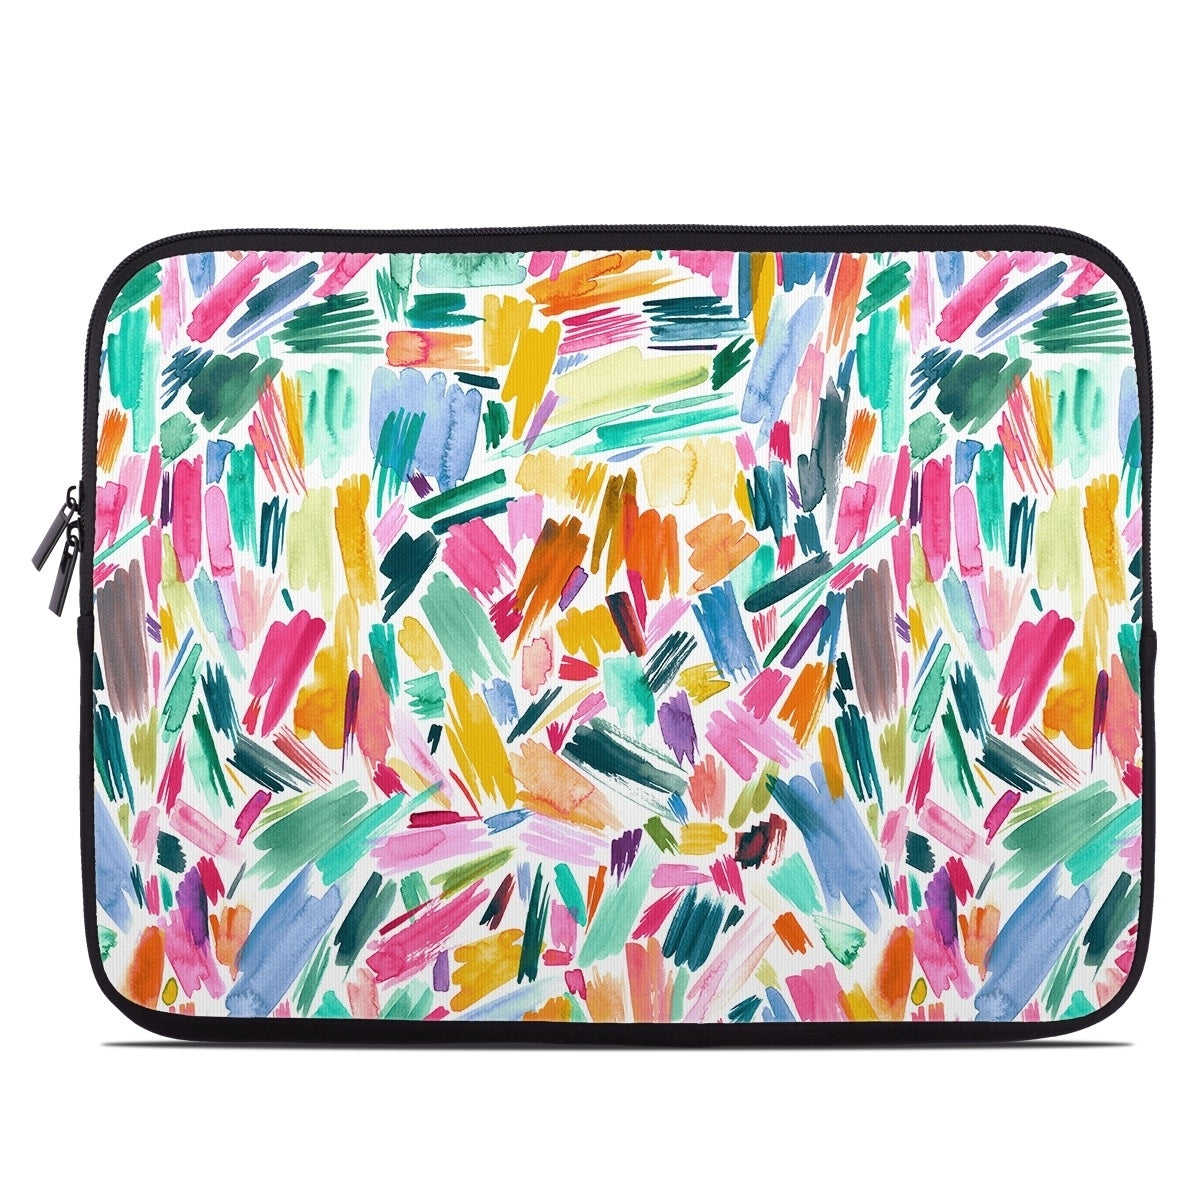 Watercolor Colorful Brushstrokes - Laptop Sleeve